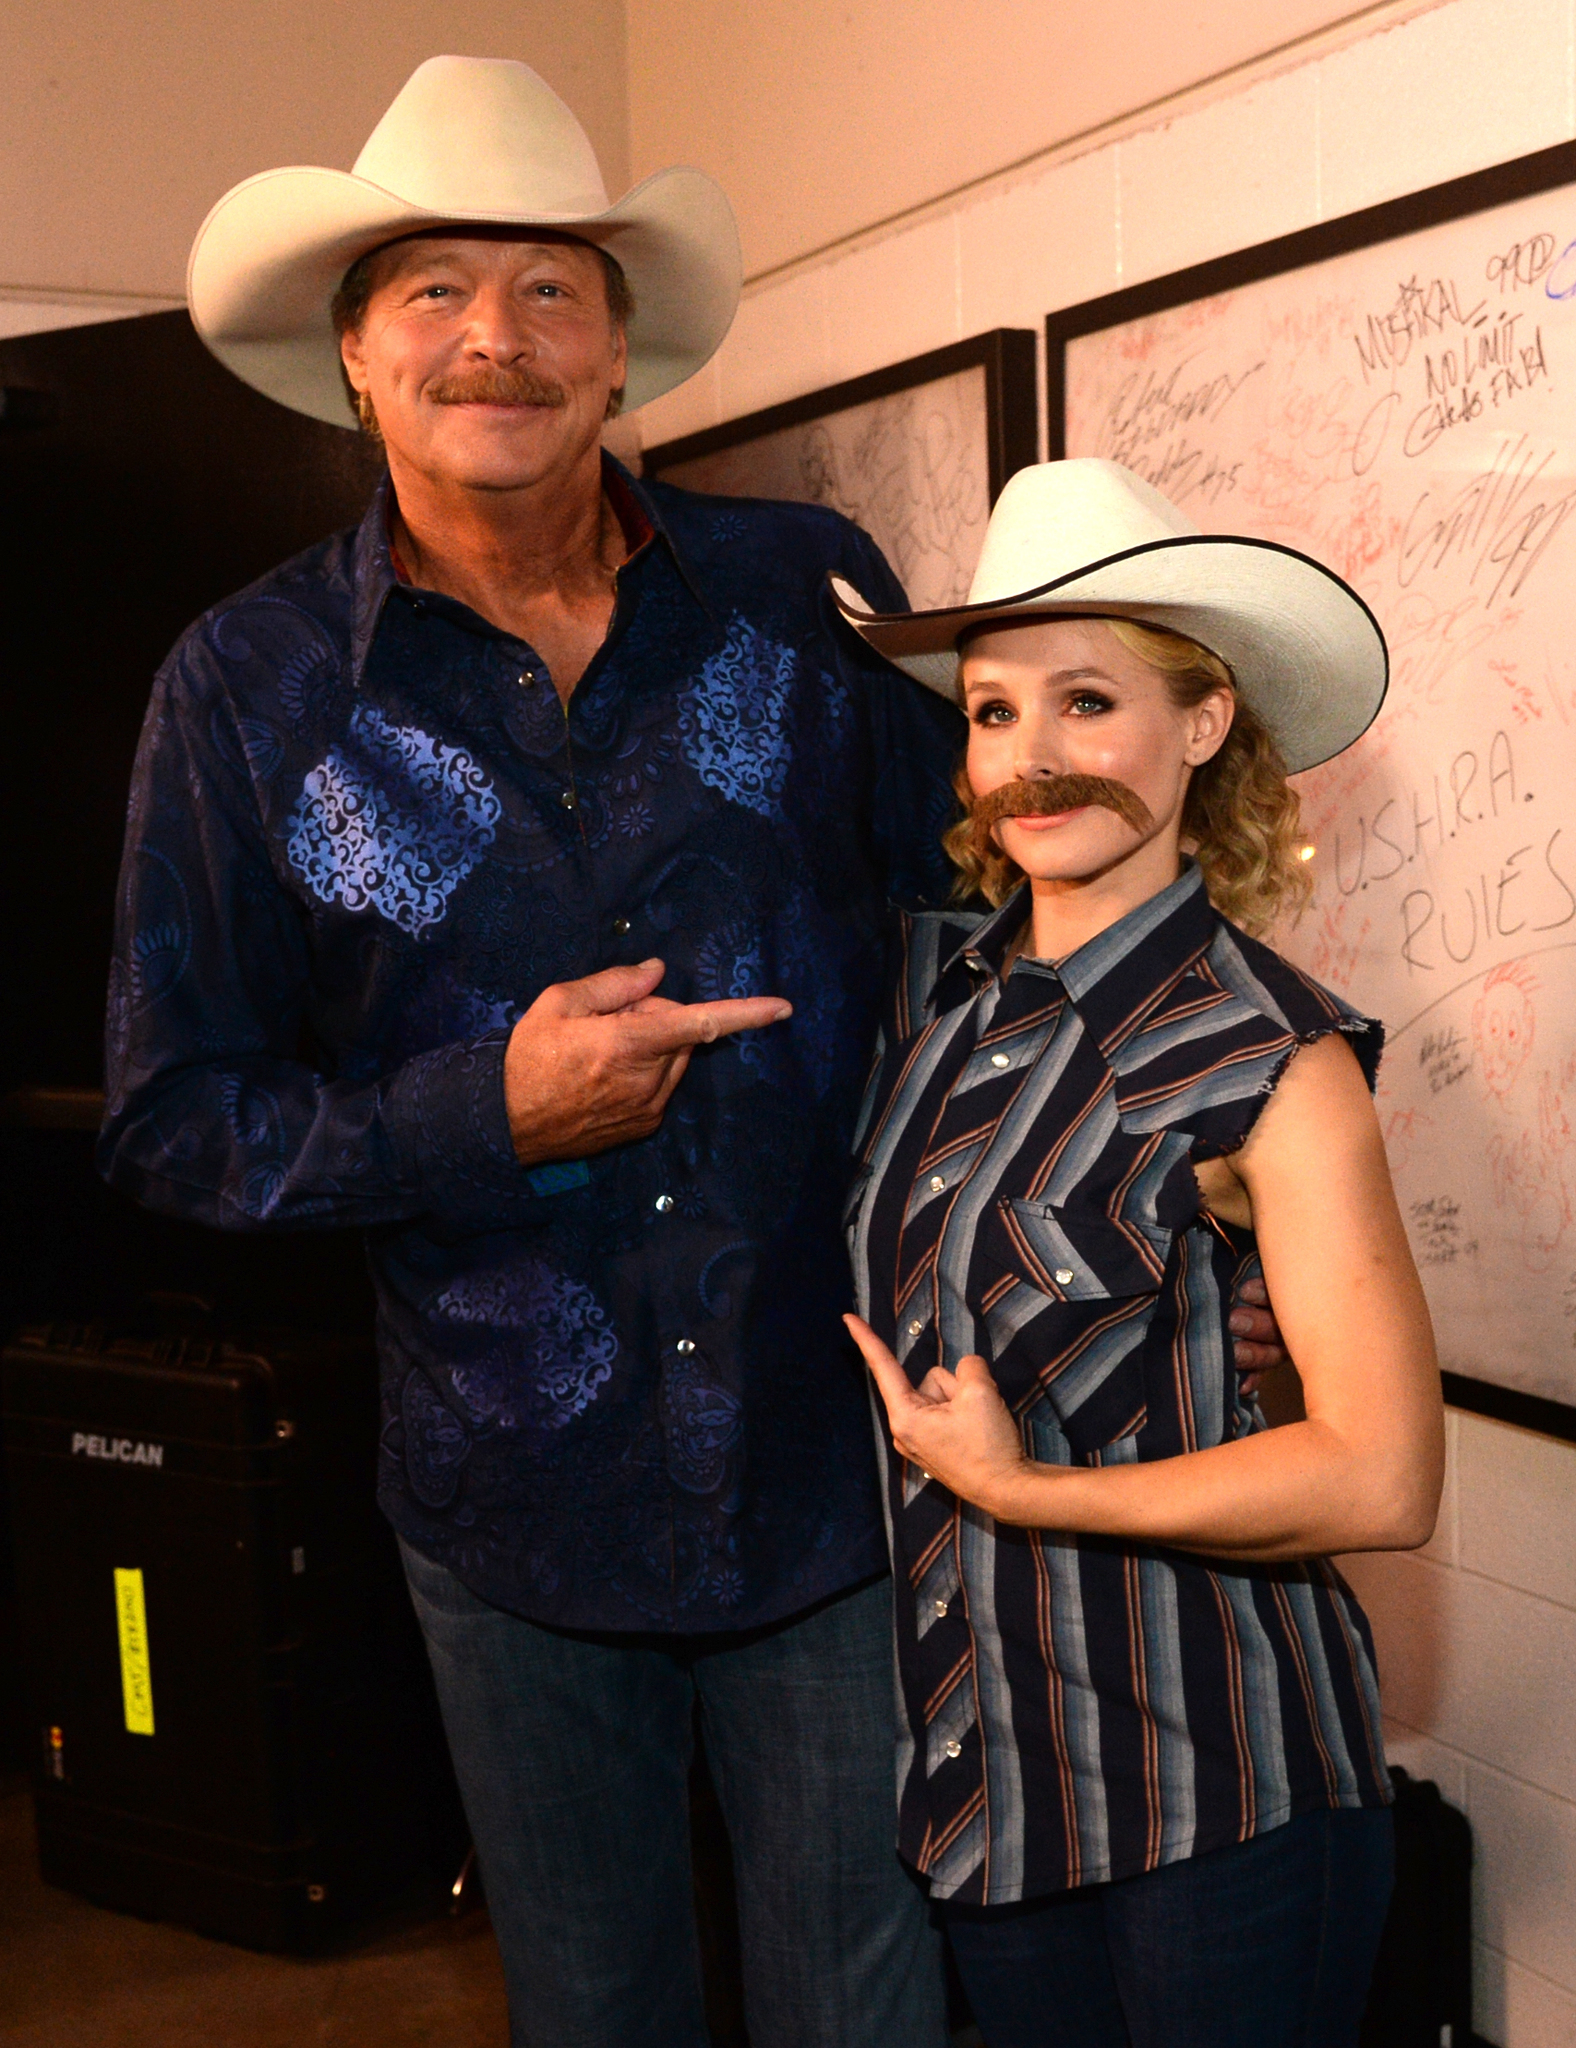 Alan Jackson and Kristen Bell attend the 2014 CMT Music Awards at Bridgestone Arena on June 4, 2014 in Nashville, Tennessee.